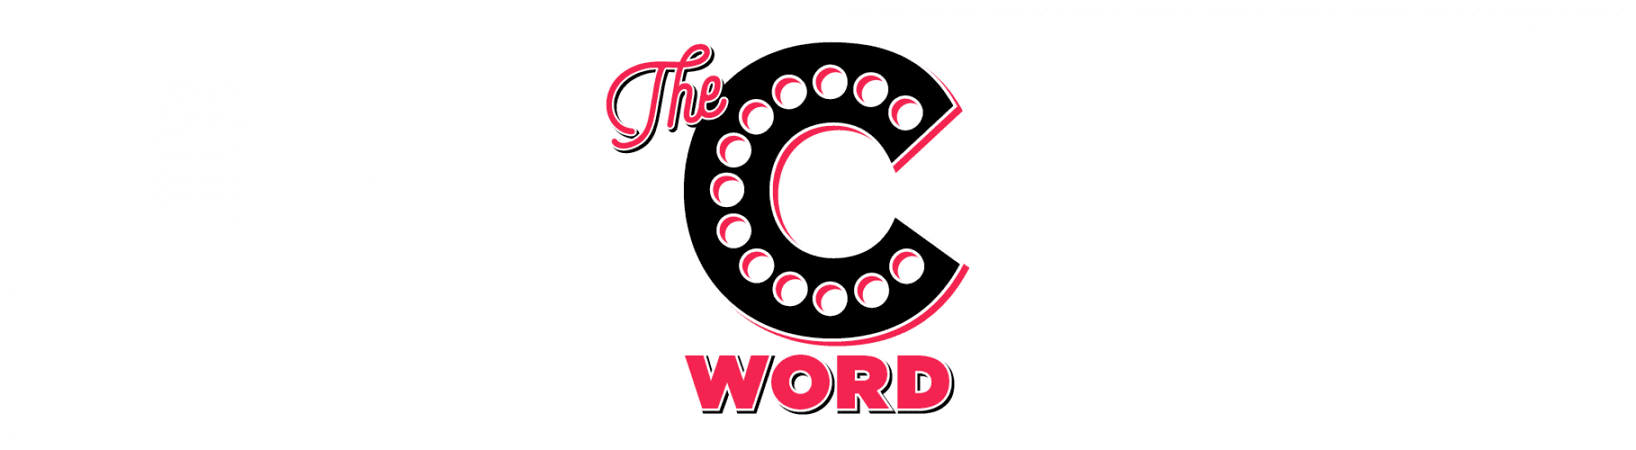 The C word. Building confidence in the workplace | scarlettabbott